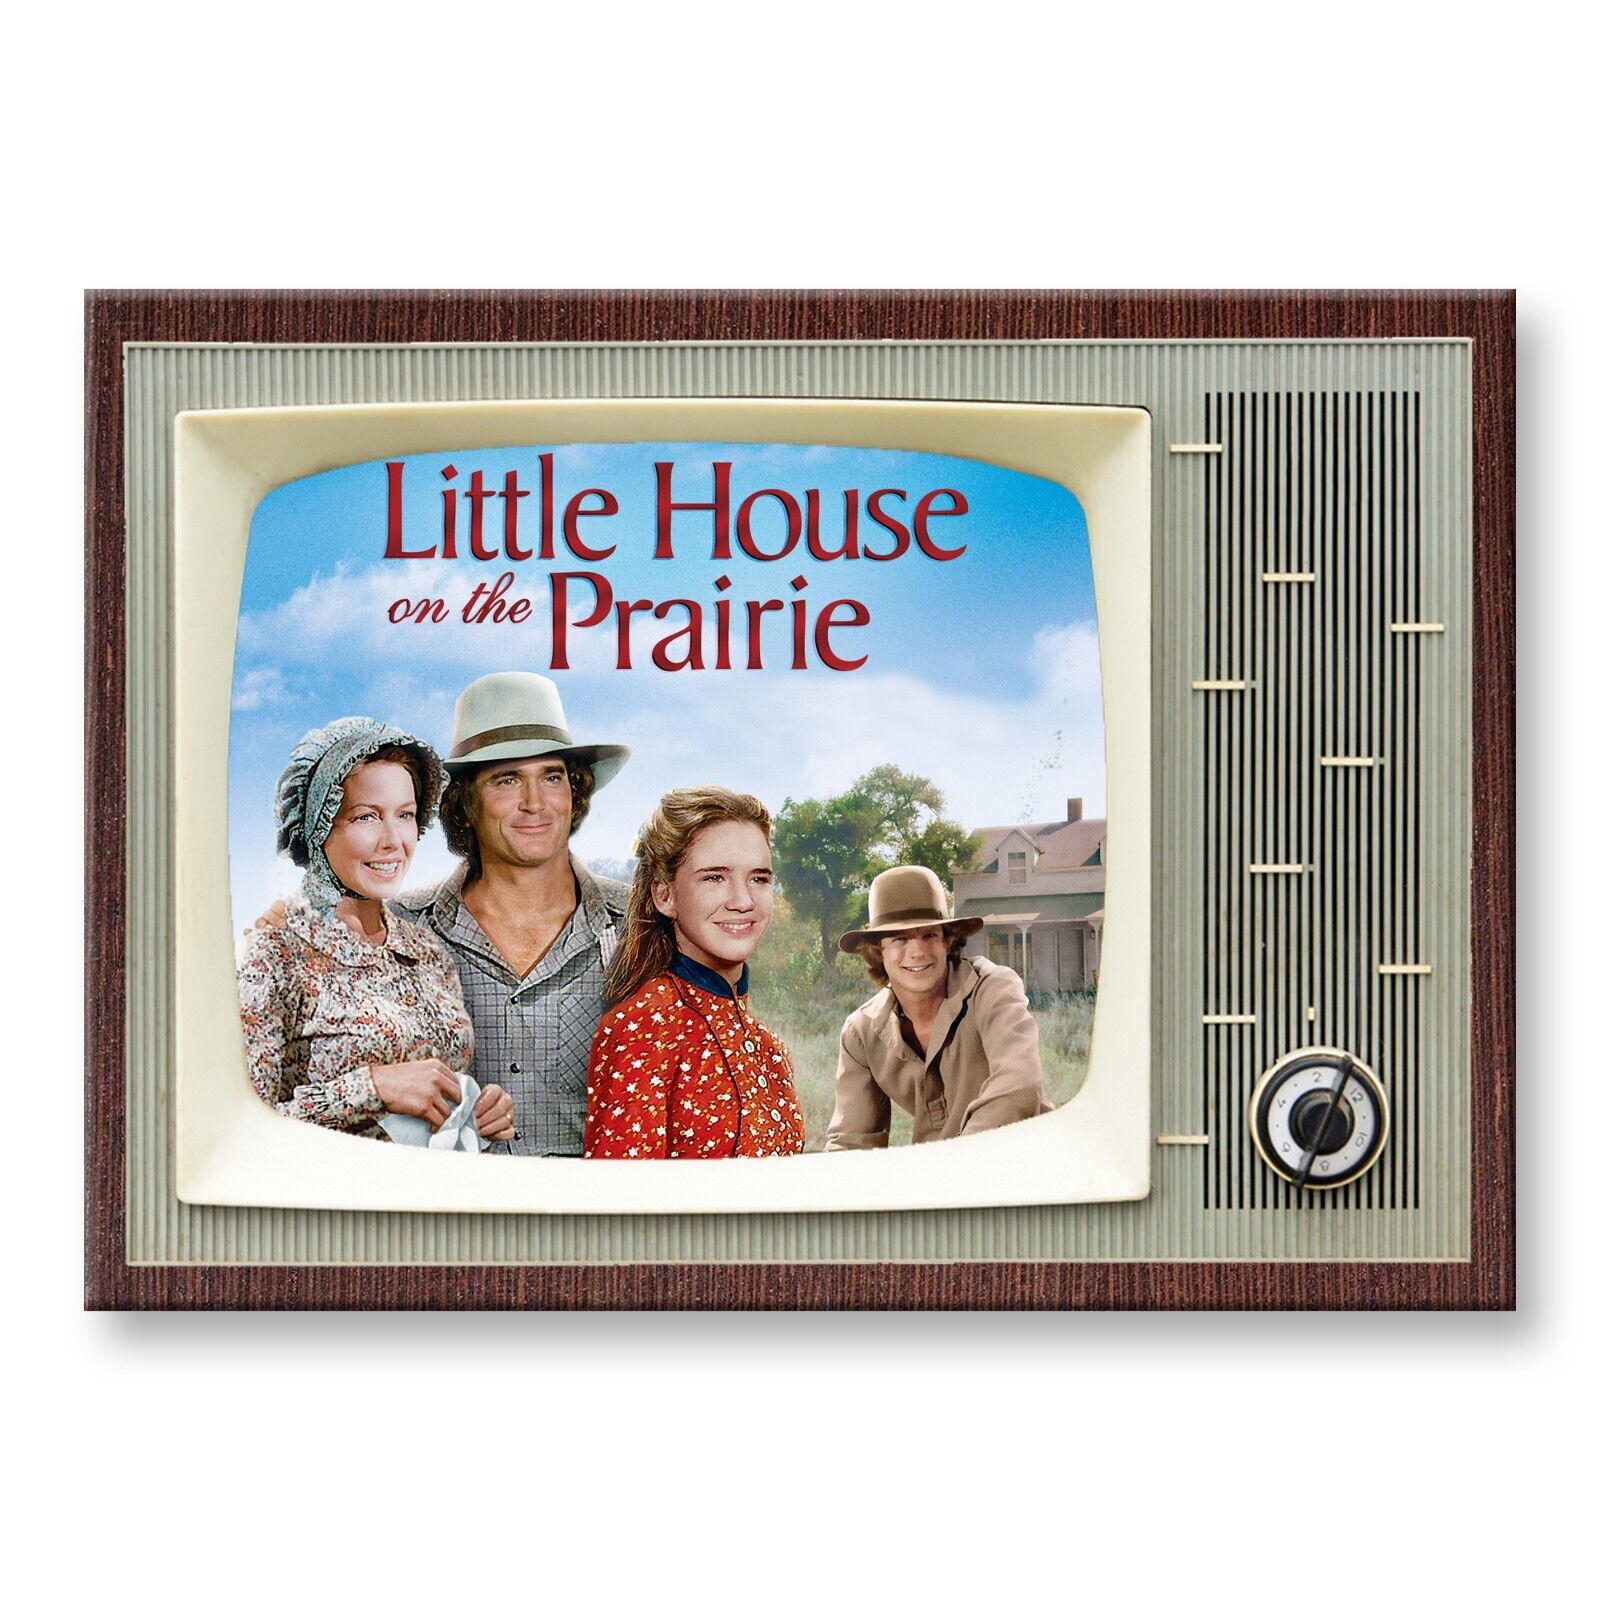 Little House on The Prairie TV Show Retro 3.5 inches x 2.5 inches Fridge Magnet